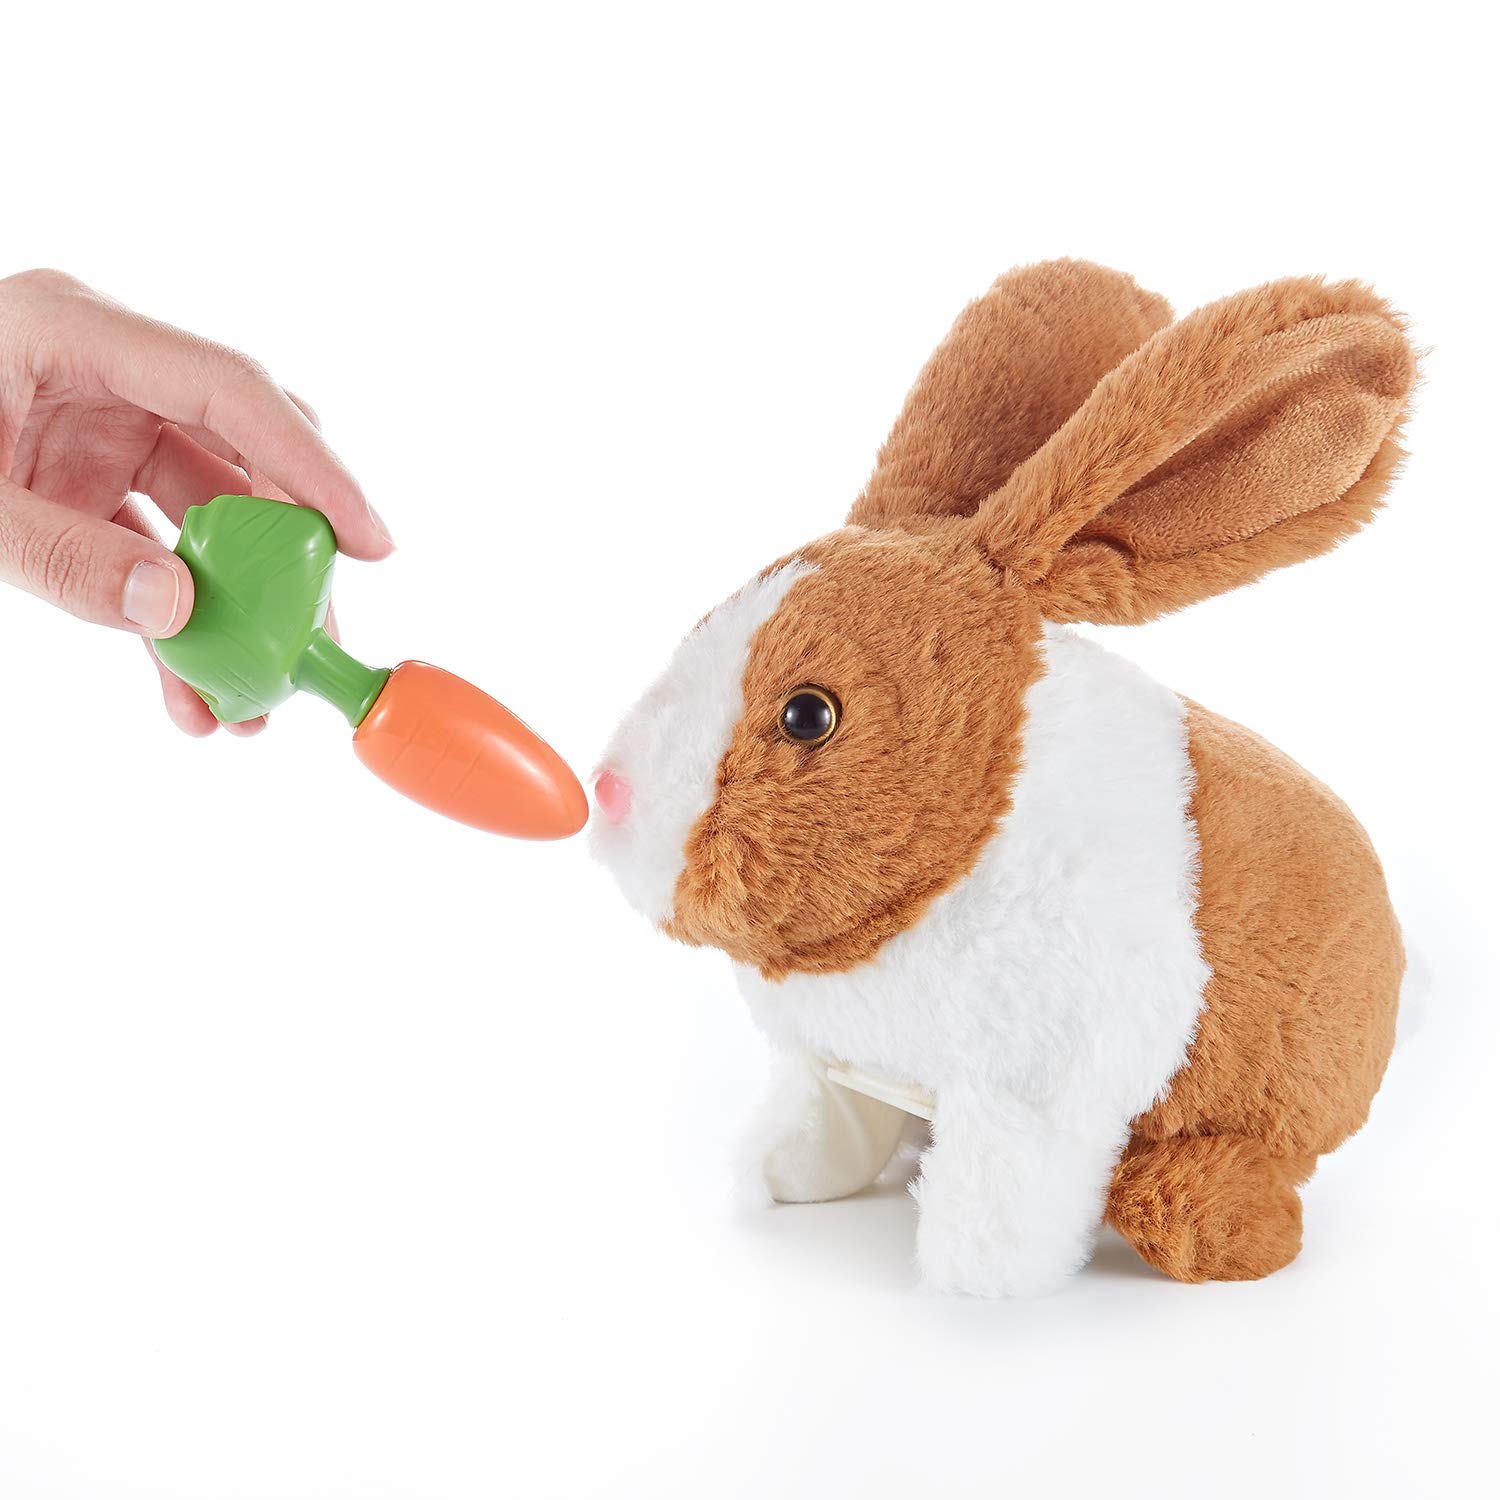 Think Gizmos Plush Rabbit Pet Toy – Cuddle Soft, Furry, Interactive Toy Animal, Hops Around Plus Comes with Pretend Play Carrot